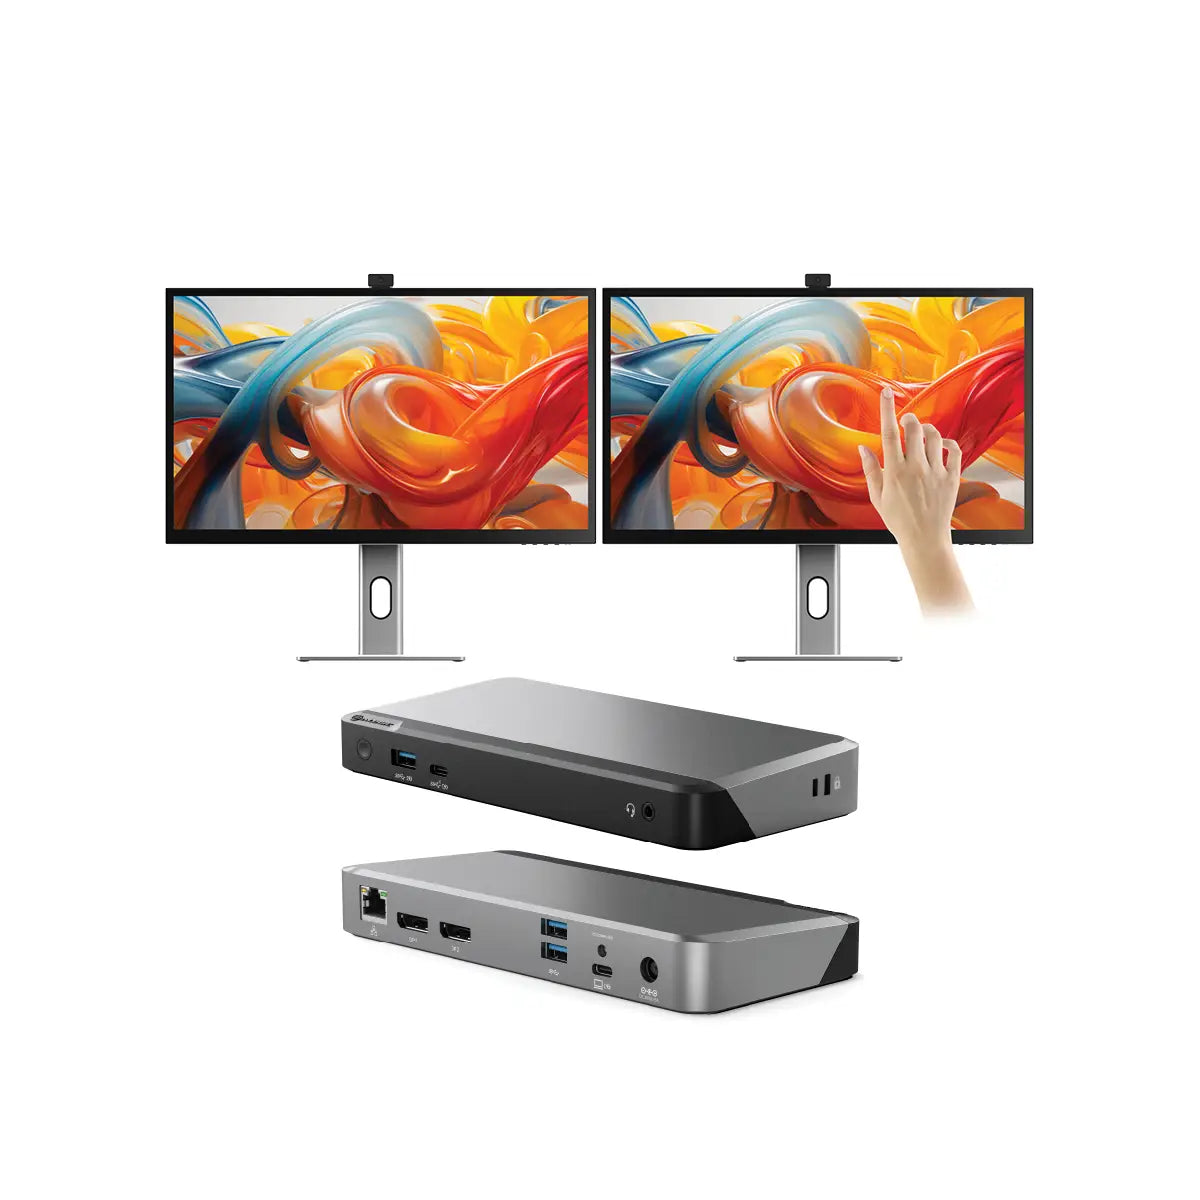 clarity-pro-touch-27-uhd-4k-monitor-with-65w-pd-webcam-and-touchscreen-pack-of-2-dx2-dual-4k-display-universal-docking-station-with-65w-power-delivery1